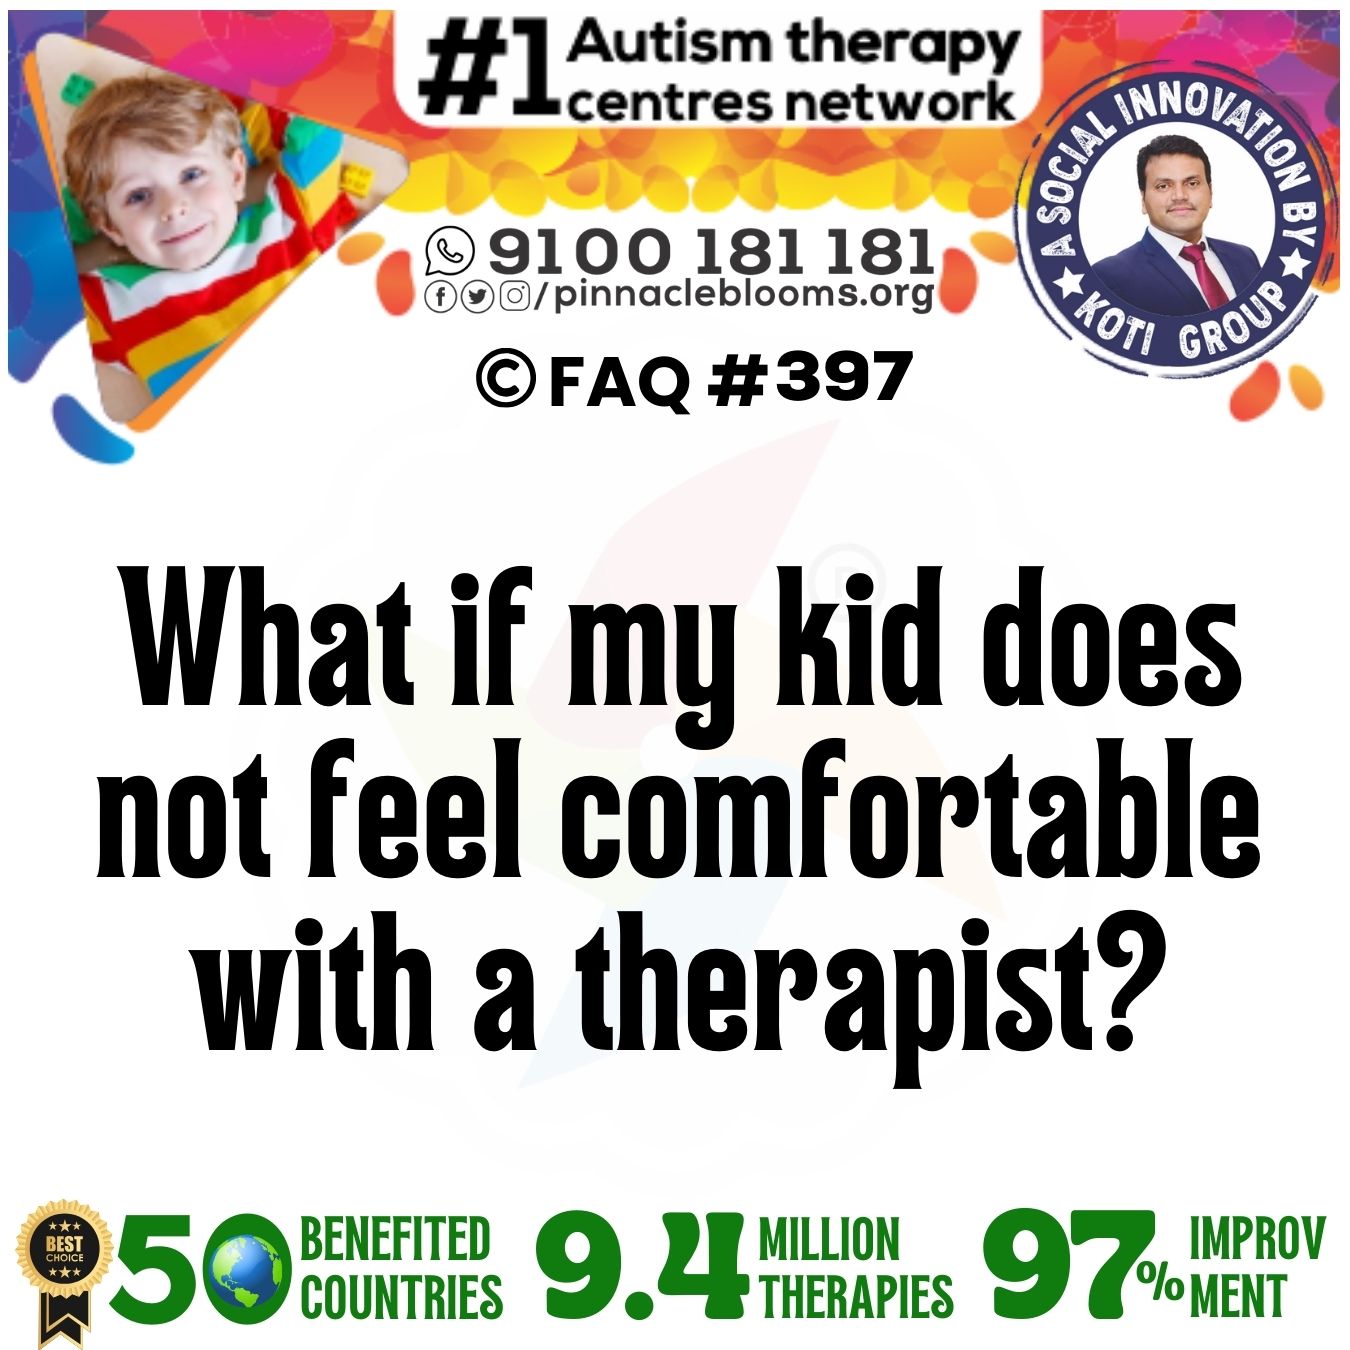 What if my kid does not feel comfortable with a therapist?